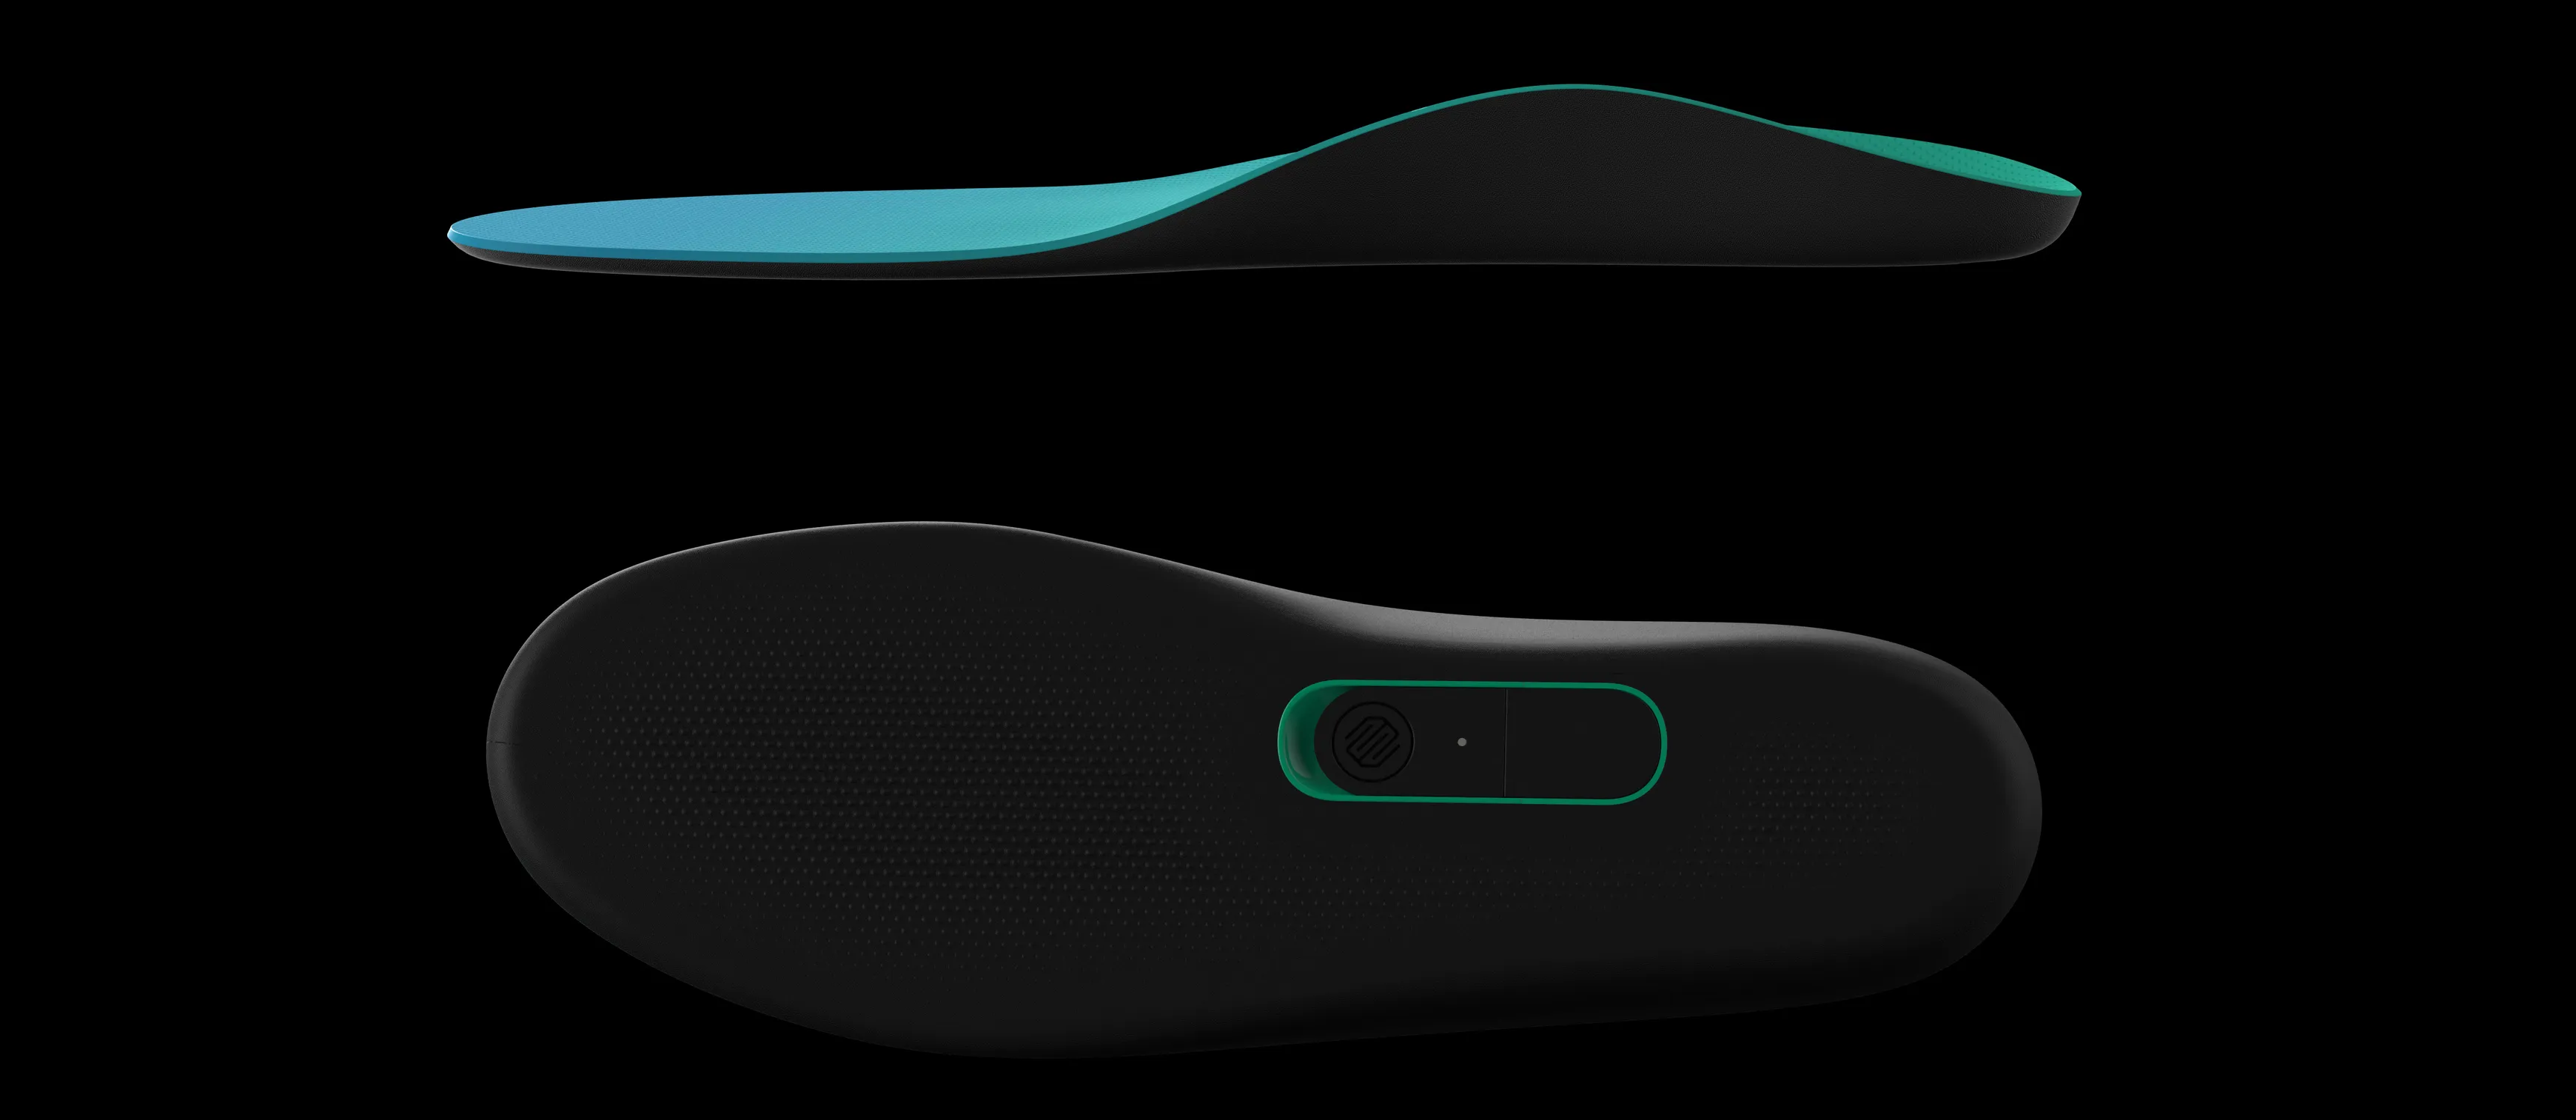 Side and top view of the Runvi smart insole